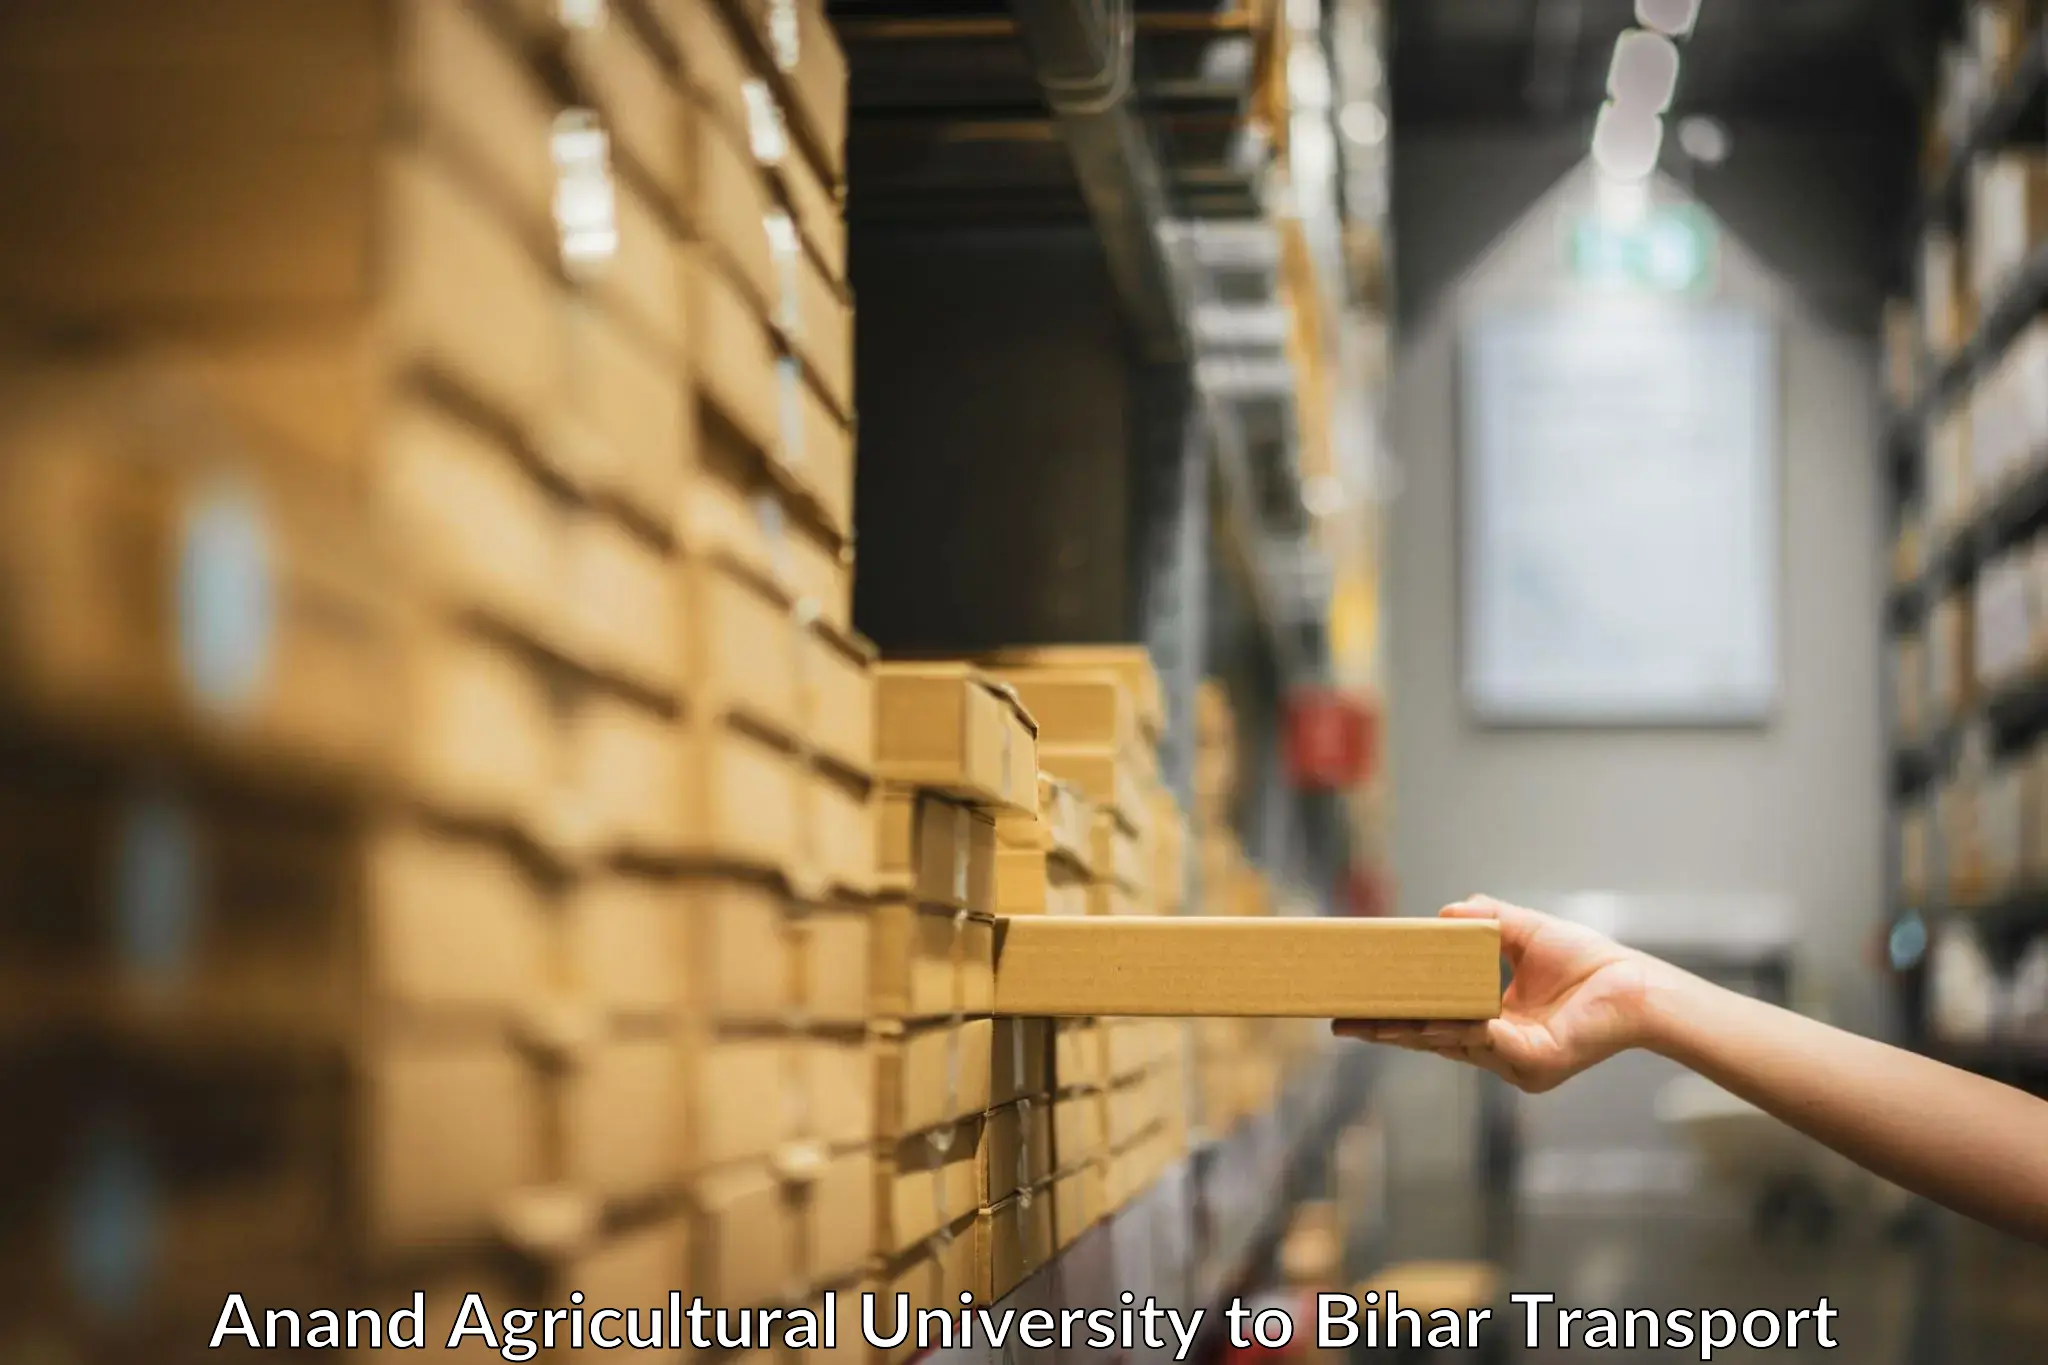 International cargo transportation services Anand Agricultural University to Baniapur